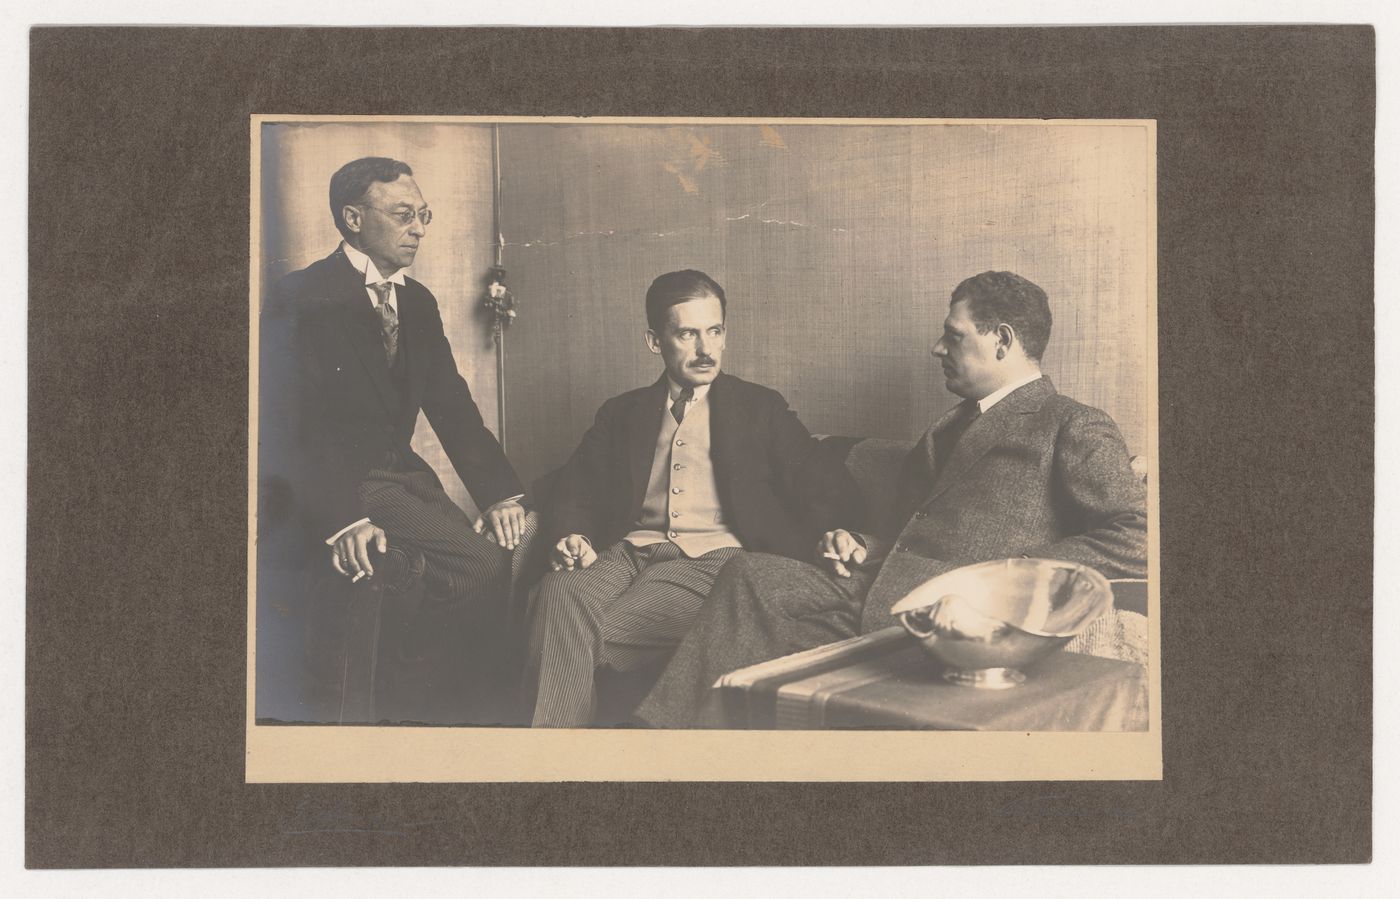 Portrait of J.J.P. Oud, Wassily Kandinsky and Walter Gropius at the Bauhaus Exhibition of 1923 in Weimar, Germany